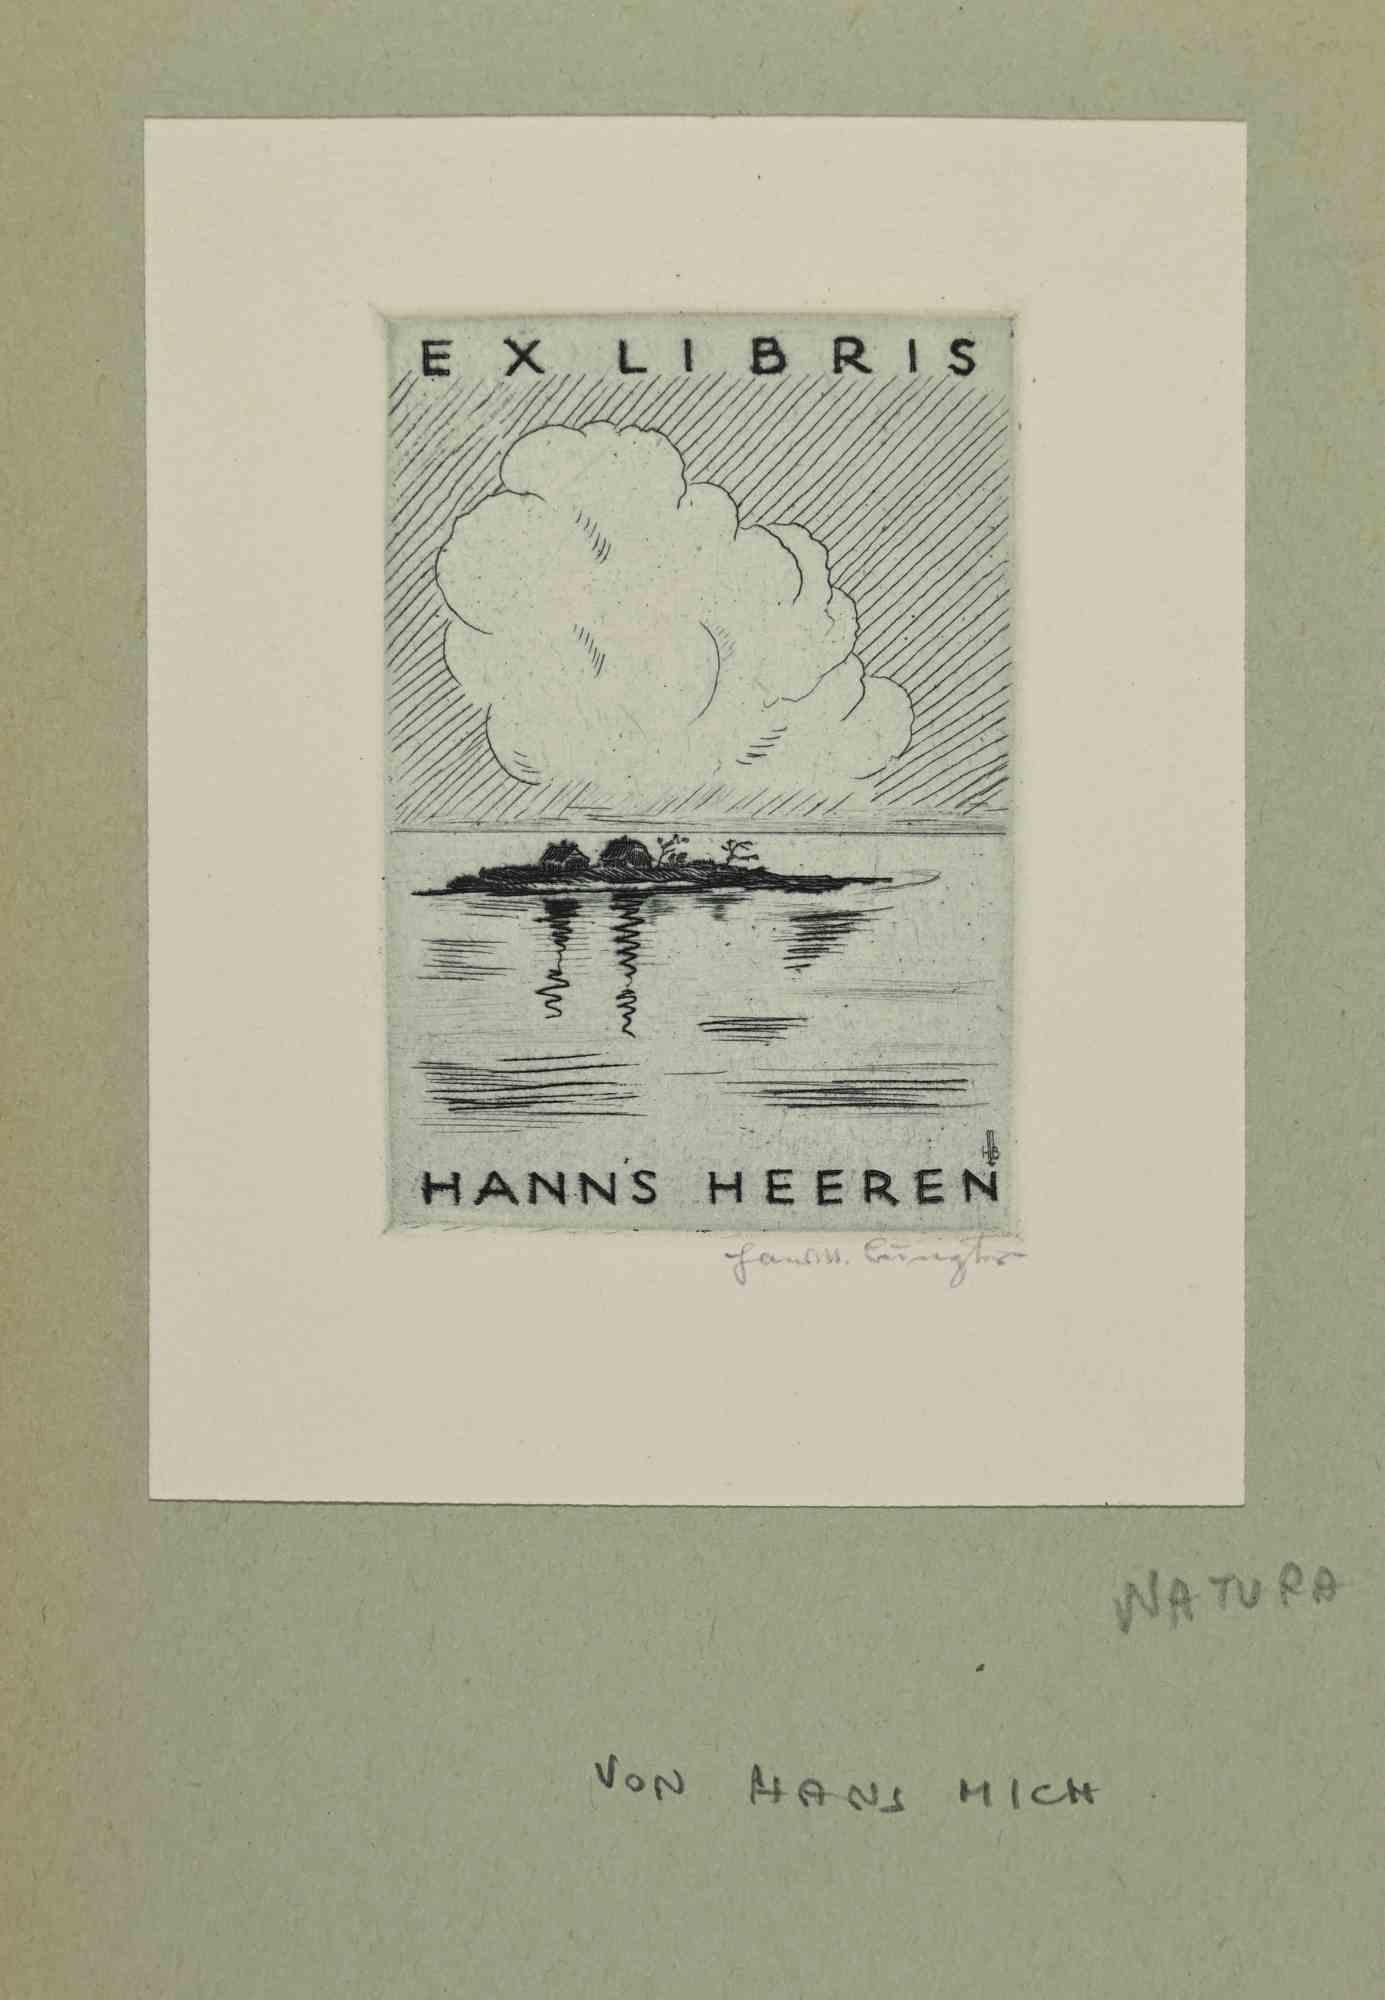 Ex Libris - Hanns Heeren  is an Artwork realized in Early 20th Century, by Hans Michael Bungter from Germany. 

Etching on ivory paper.  Hand Signed on the right corner. Signed on plate on back. The work is glued on green cardboard.

Total